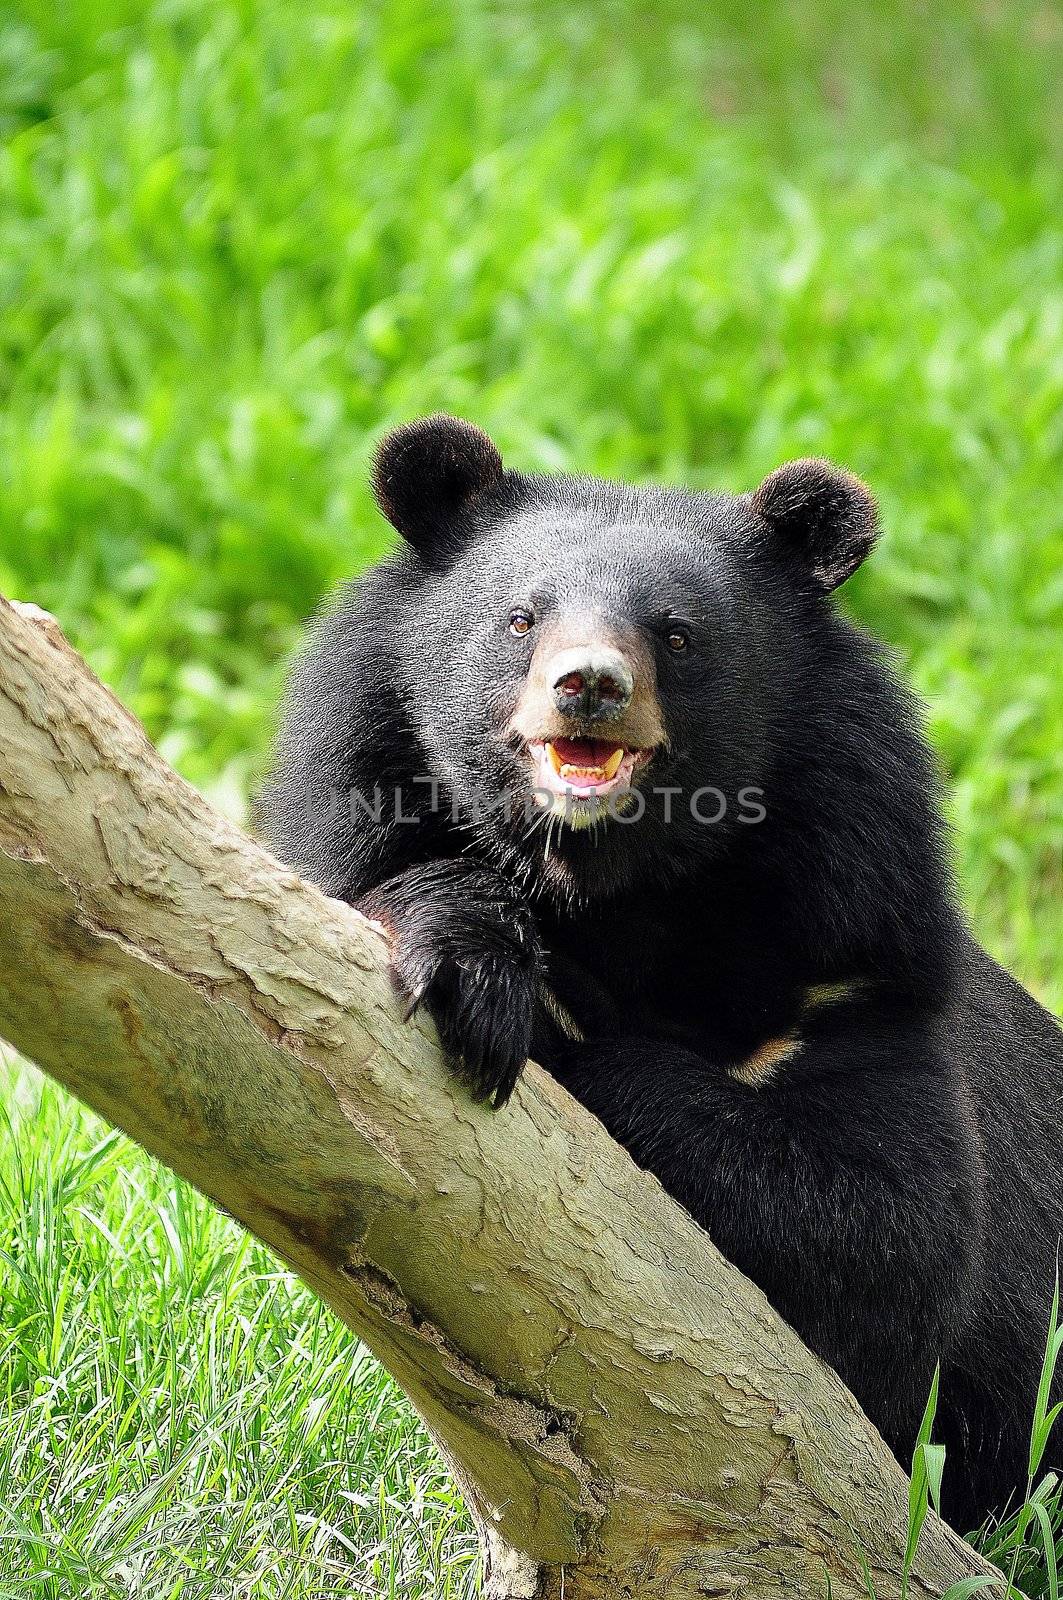 asiatic black bear by MaZiKab